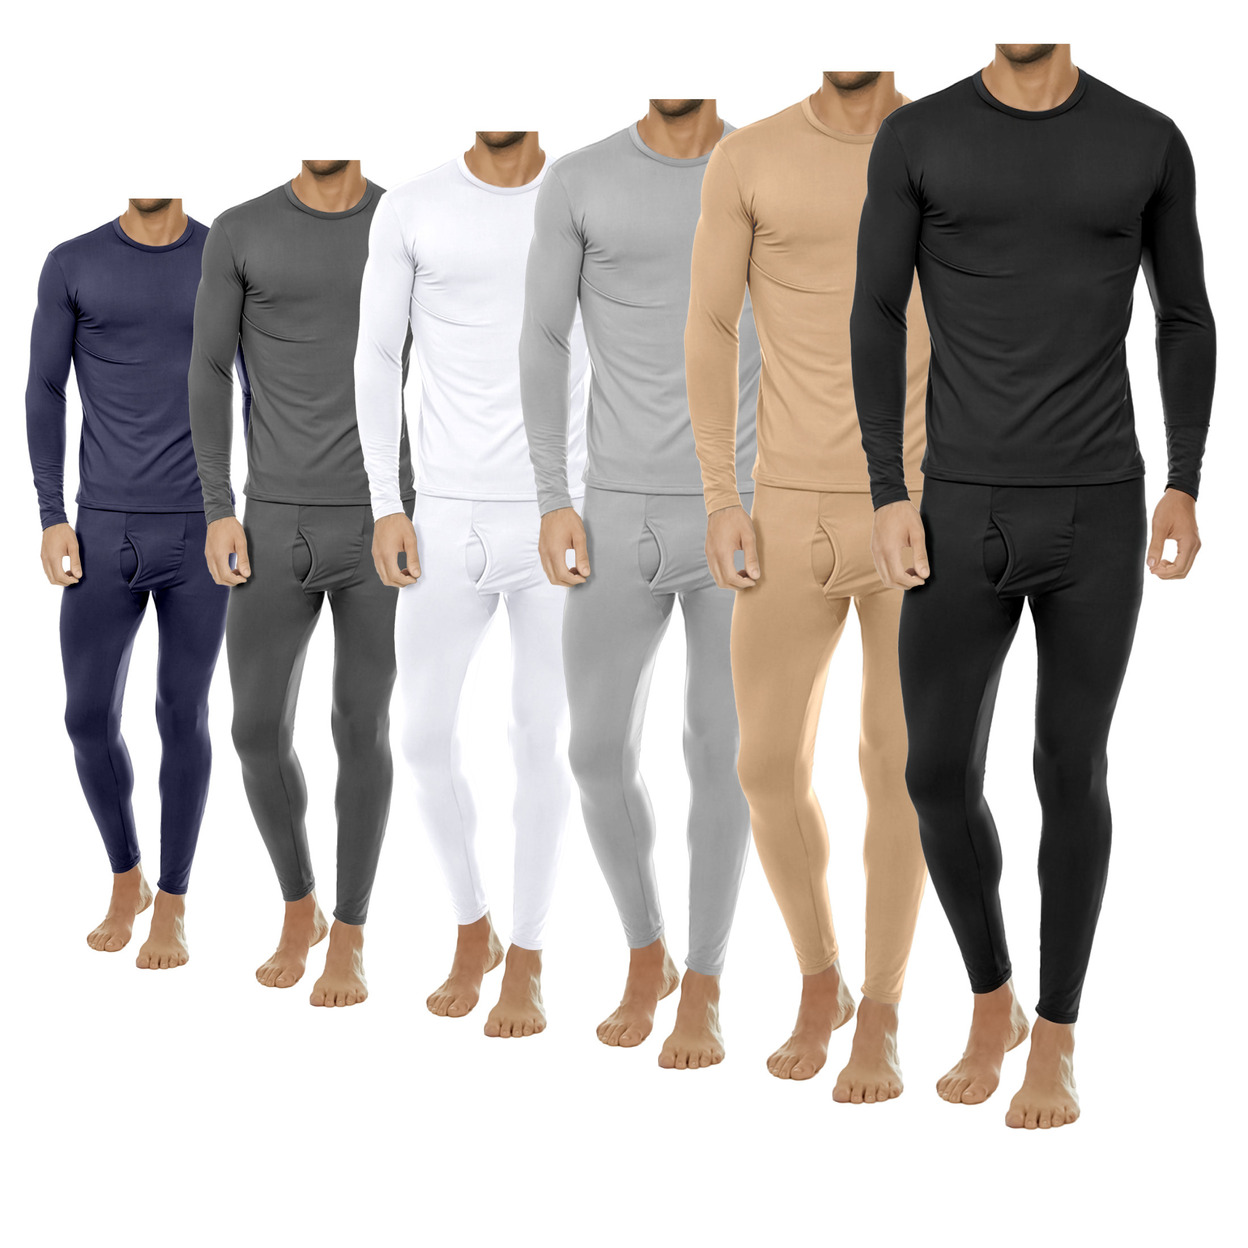 2-Pieces: Men's Winter Warm Fleece Lined Thermal Underwear Set For Cold Weather - Grey, Small